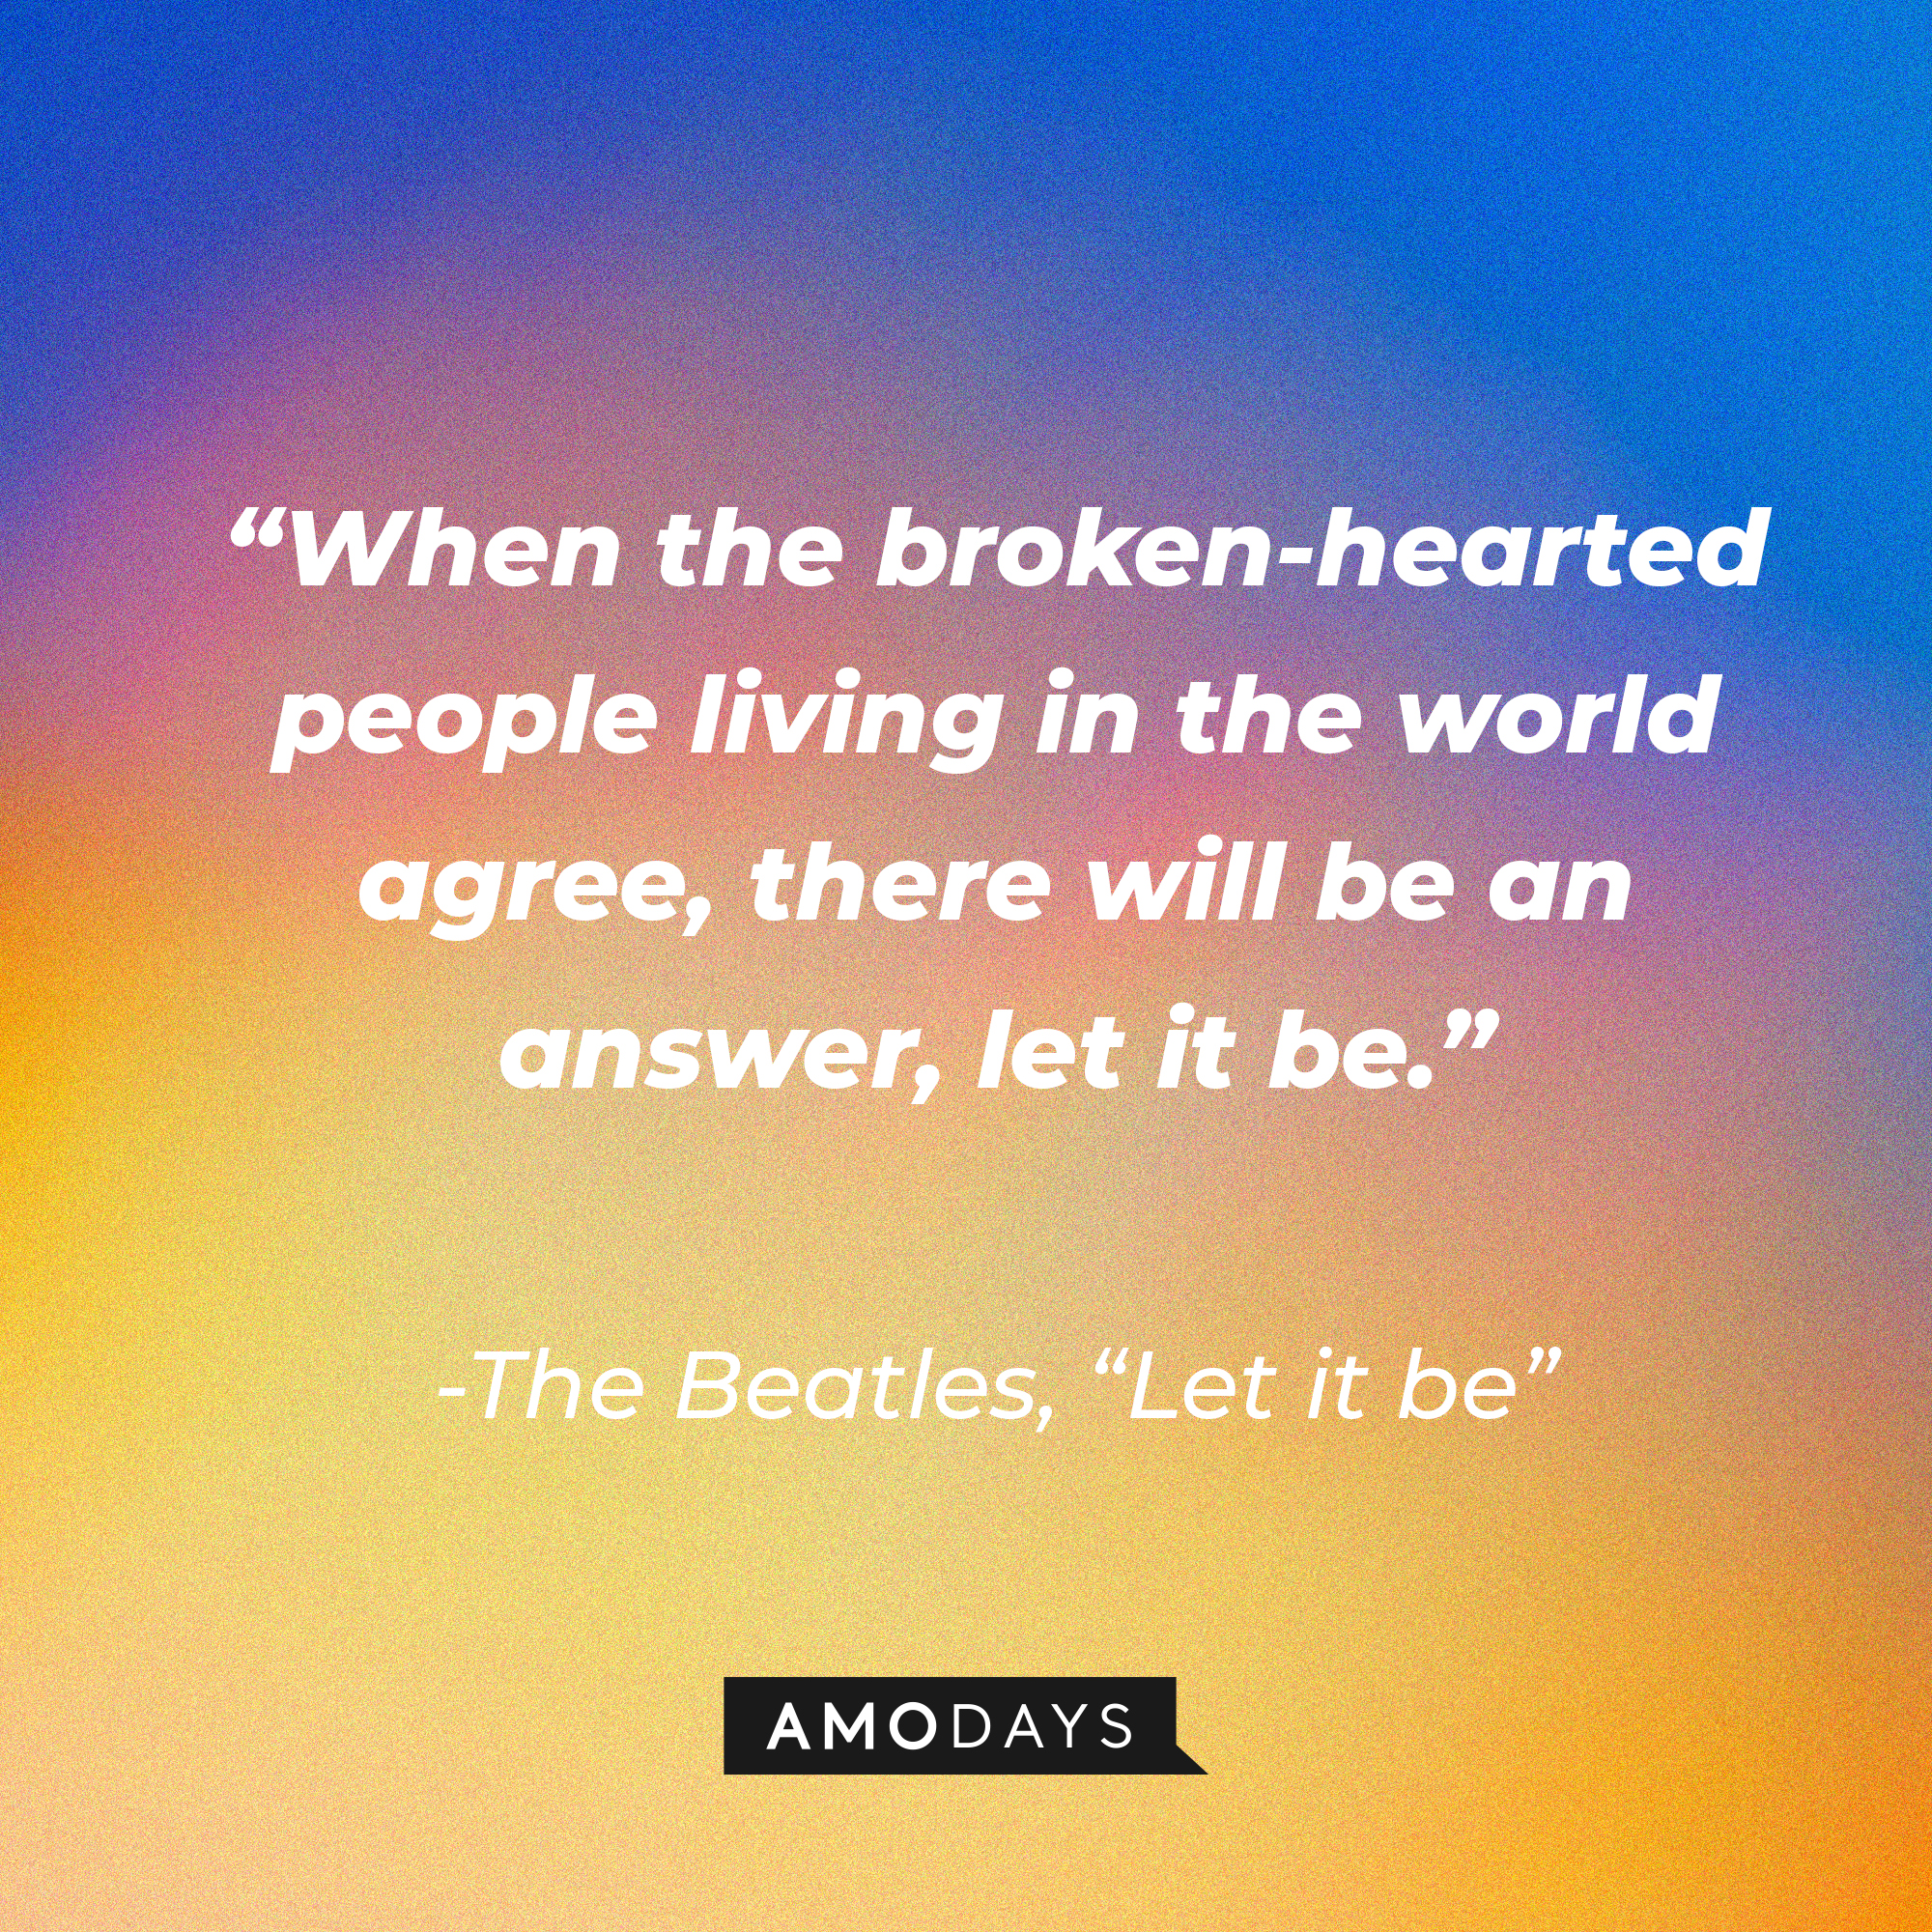 The Beatles' quote: "And when the broken hearted people living in the world agree There will be an answer, let it be" | Image: AmoDays